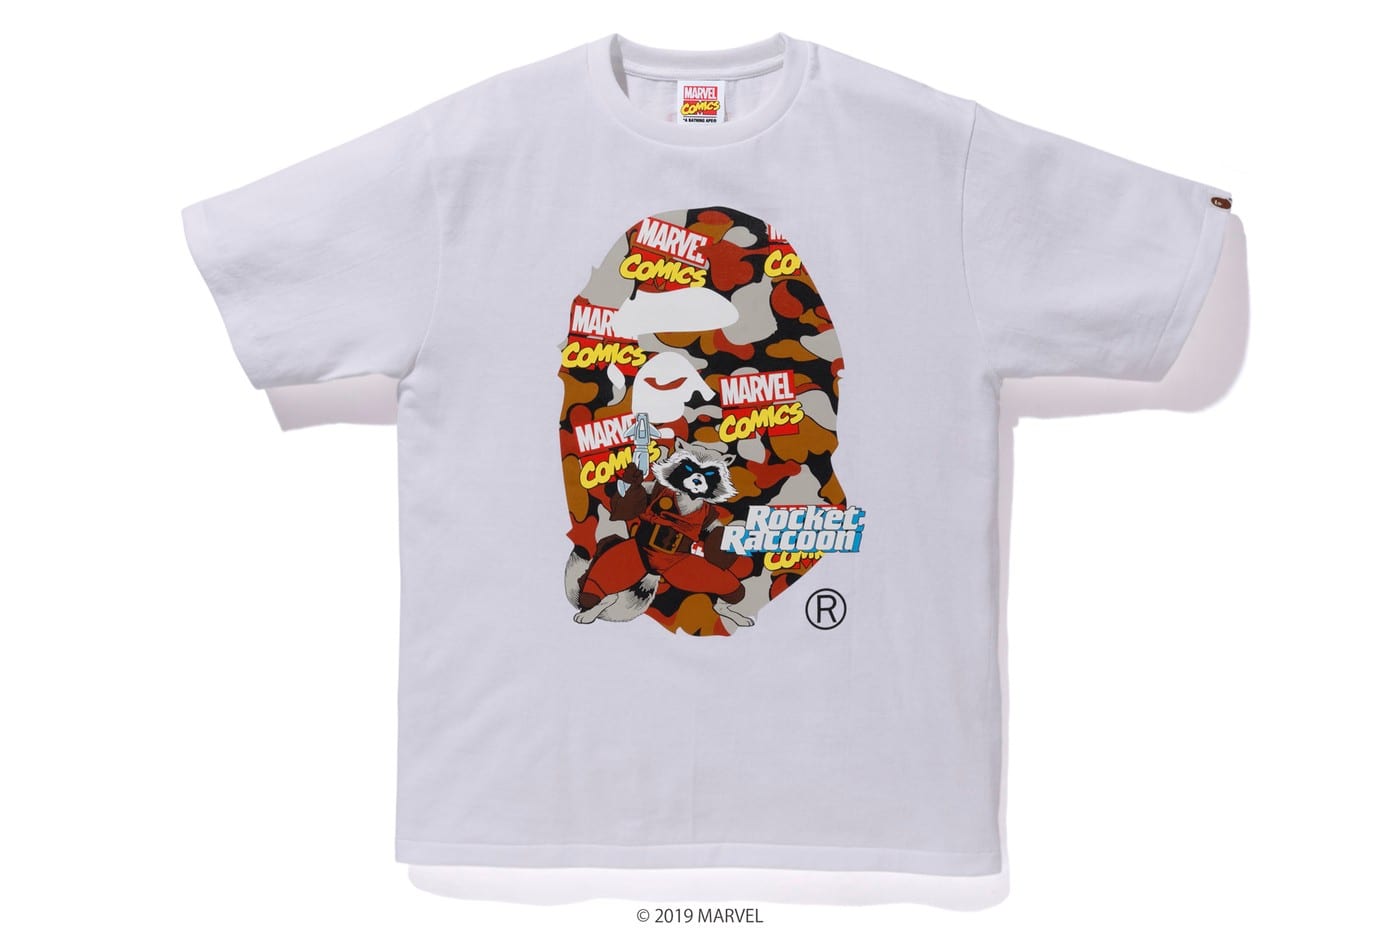 A Bathing Ape x Marvel Comics SS19 Collection - The Source